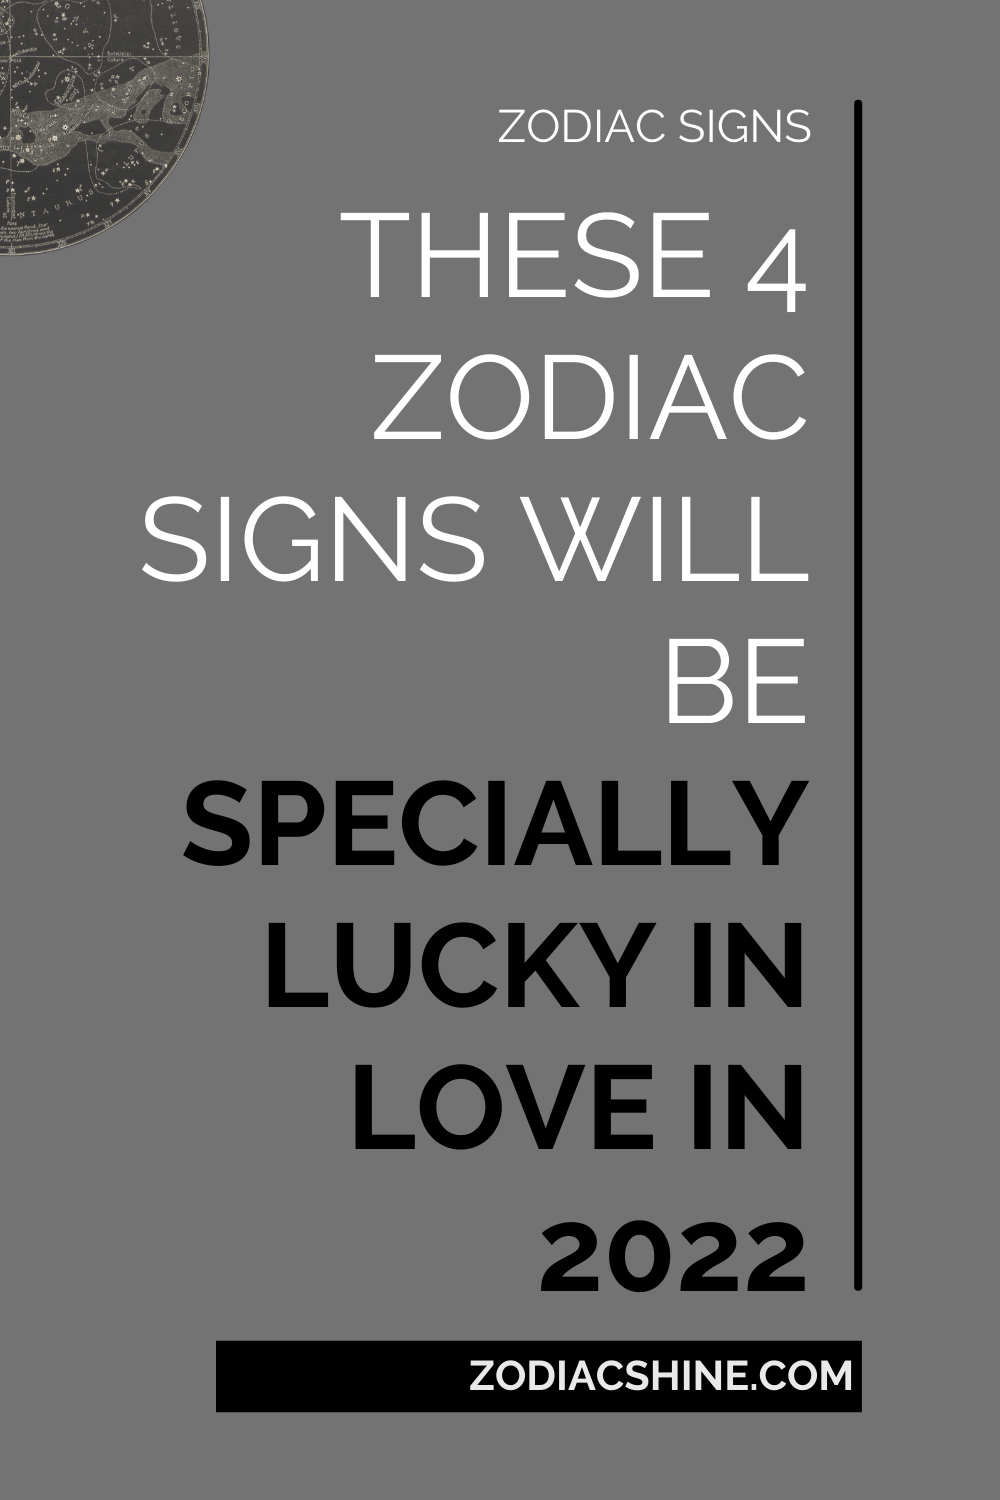 These 4 Zodiac Signs Will Be Specially Lucky In Love In 2022